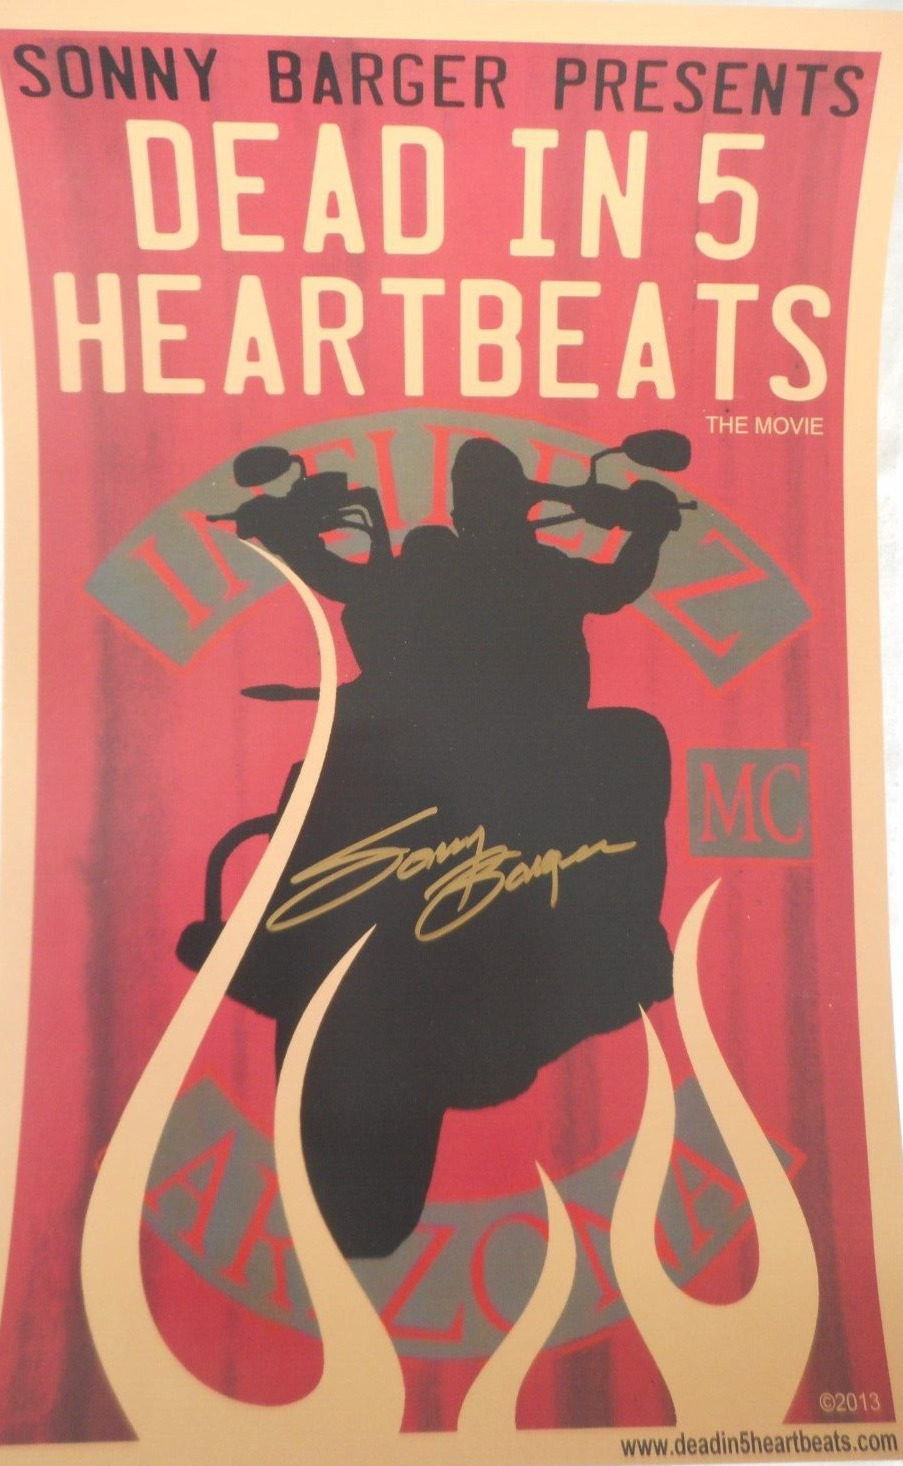 Sonny Barger Hell's Angels Hand Signed Movie Poster  Dead In 5 Heartbeats 2013